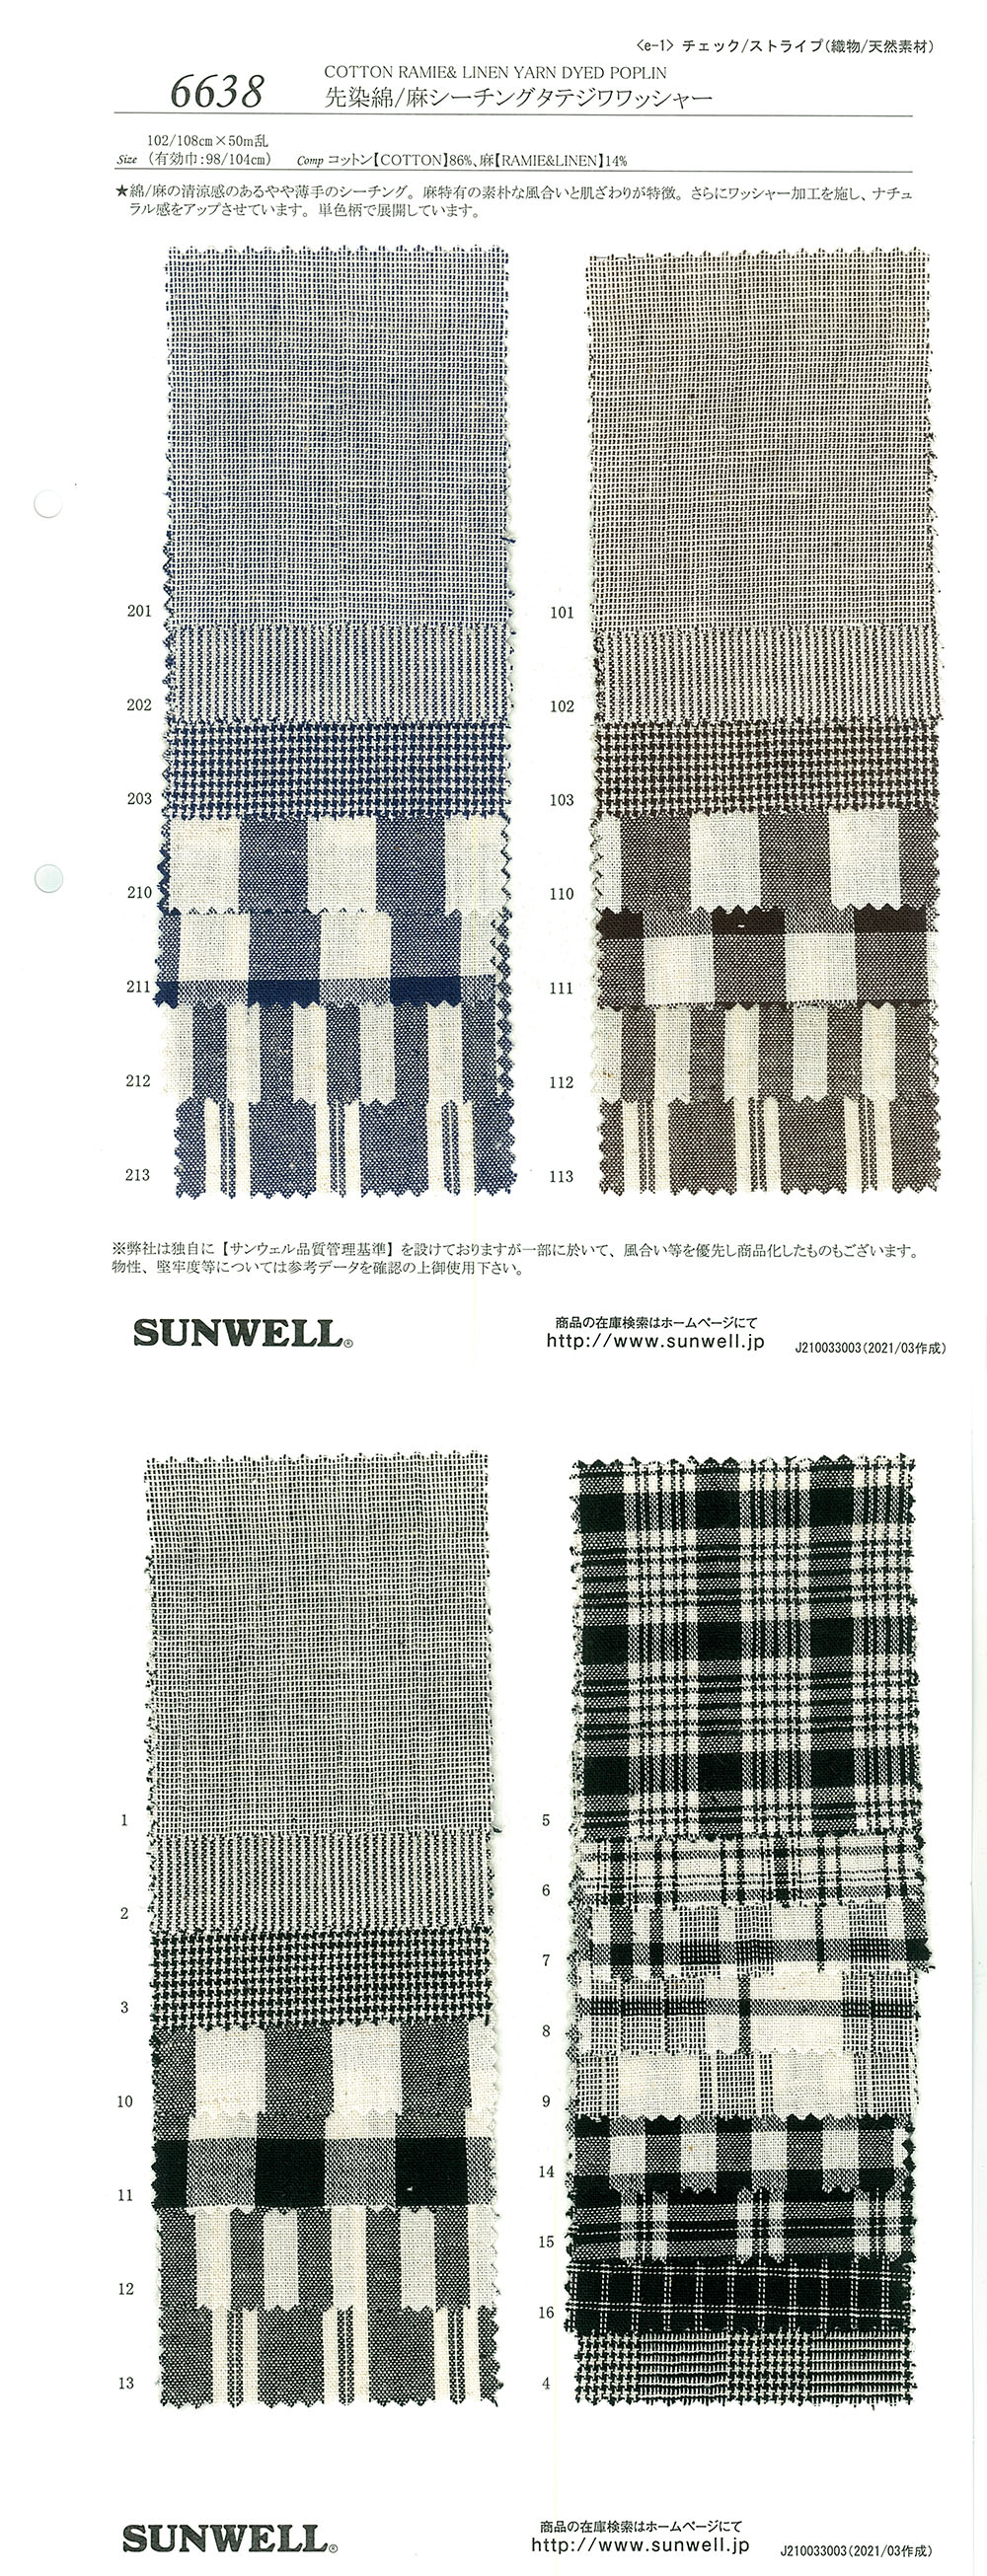 6638 Yarn-dyed Cotton/ Linen Loomstate Vertical Washer Processing[Textile / Fabric] SUNWELL